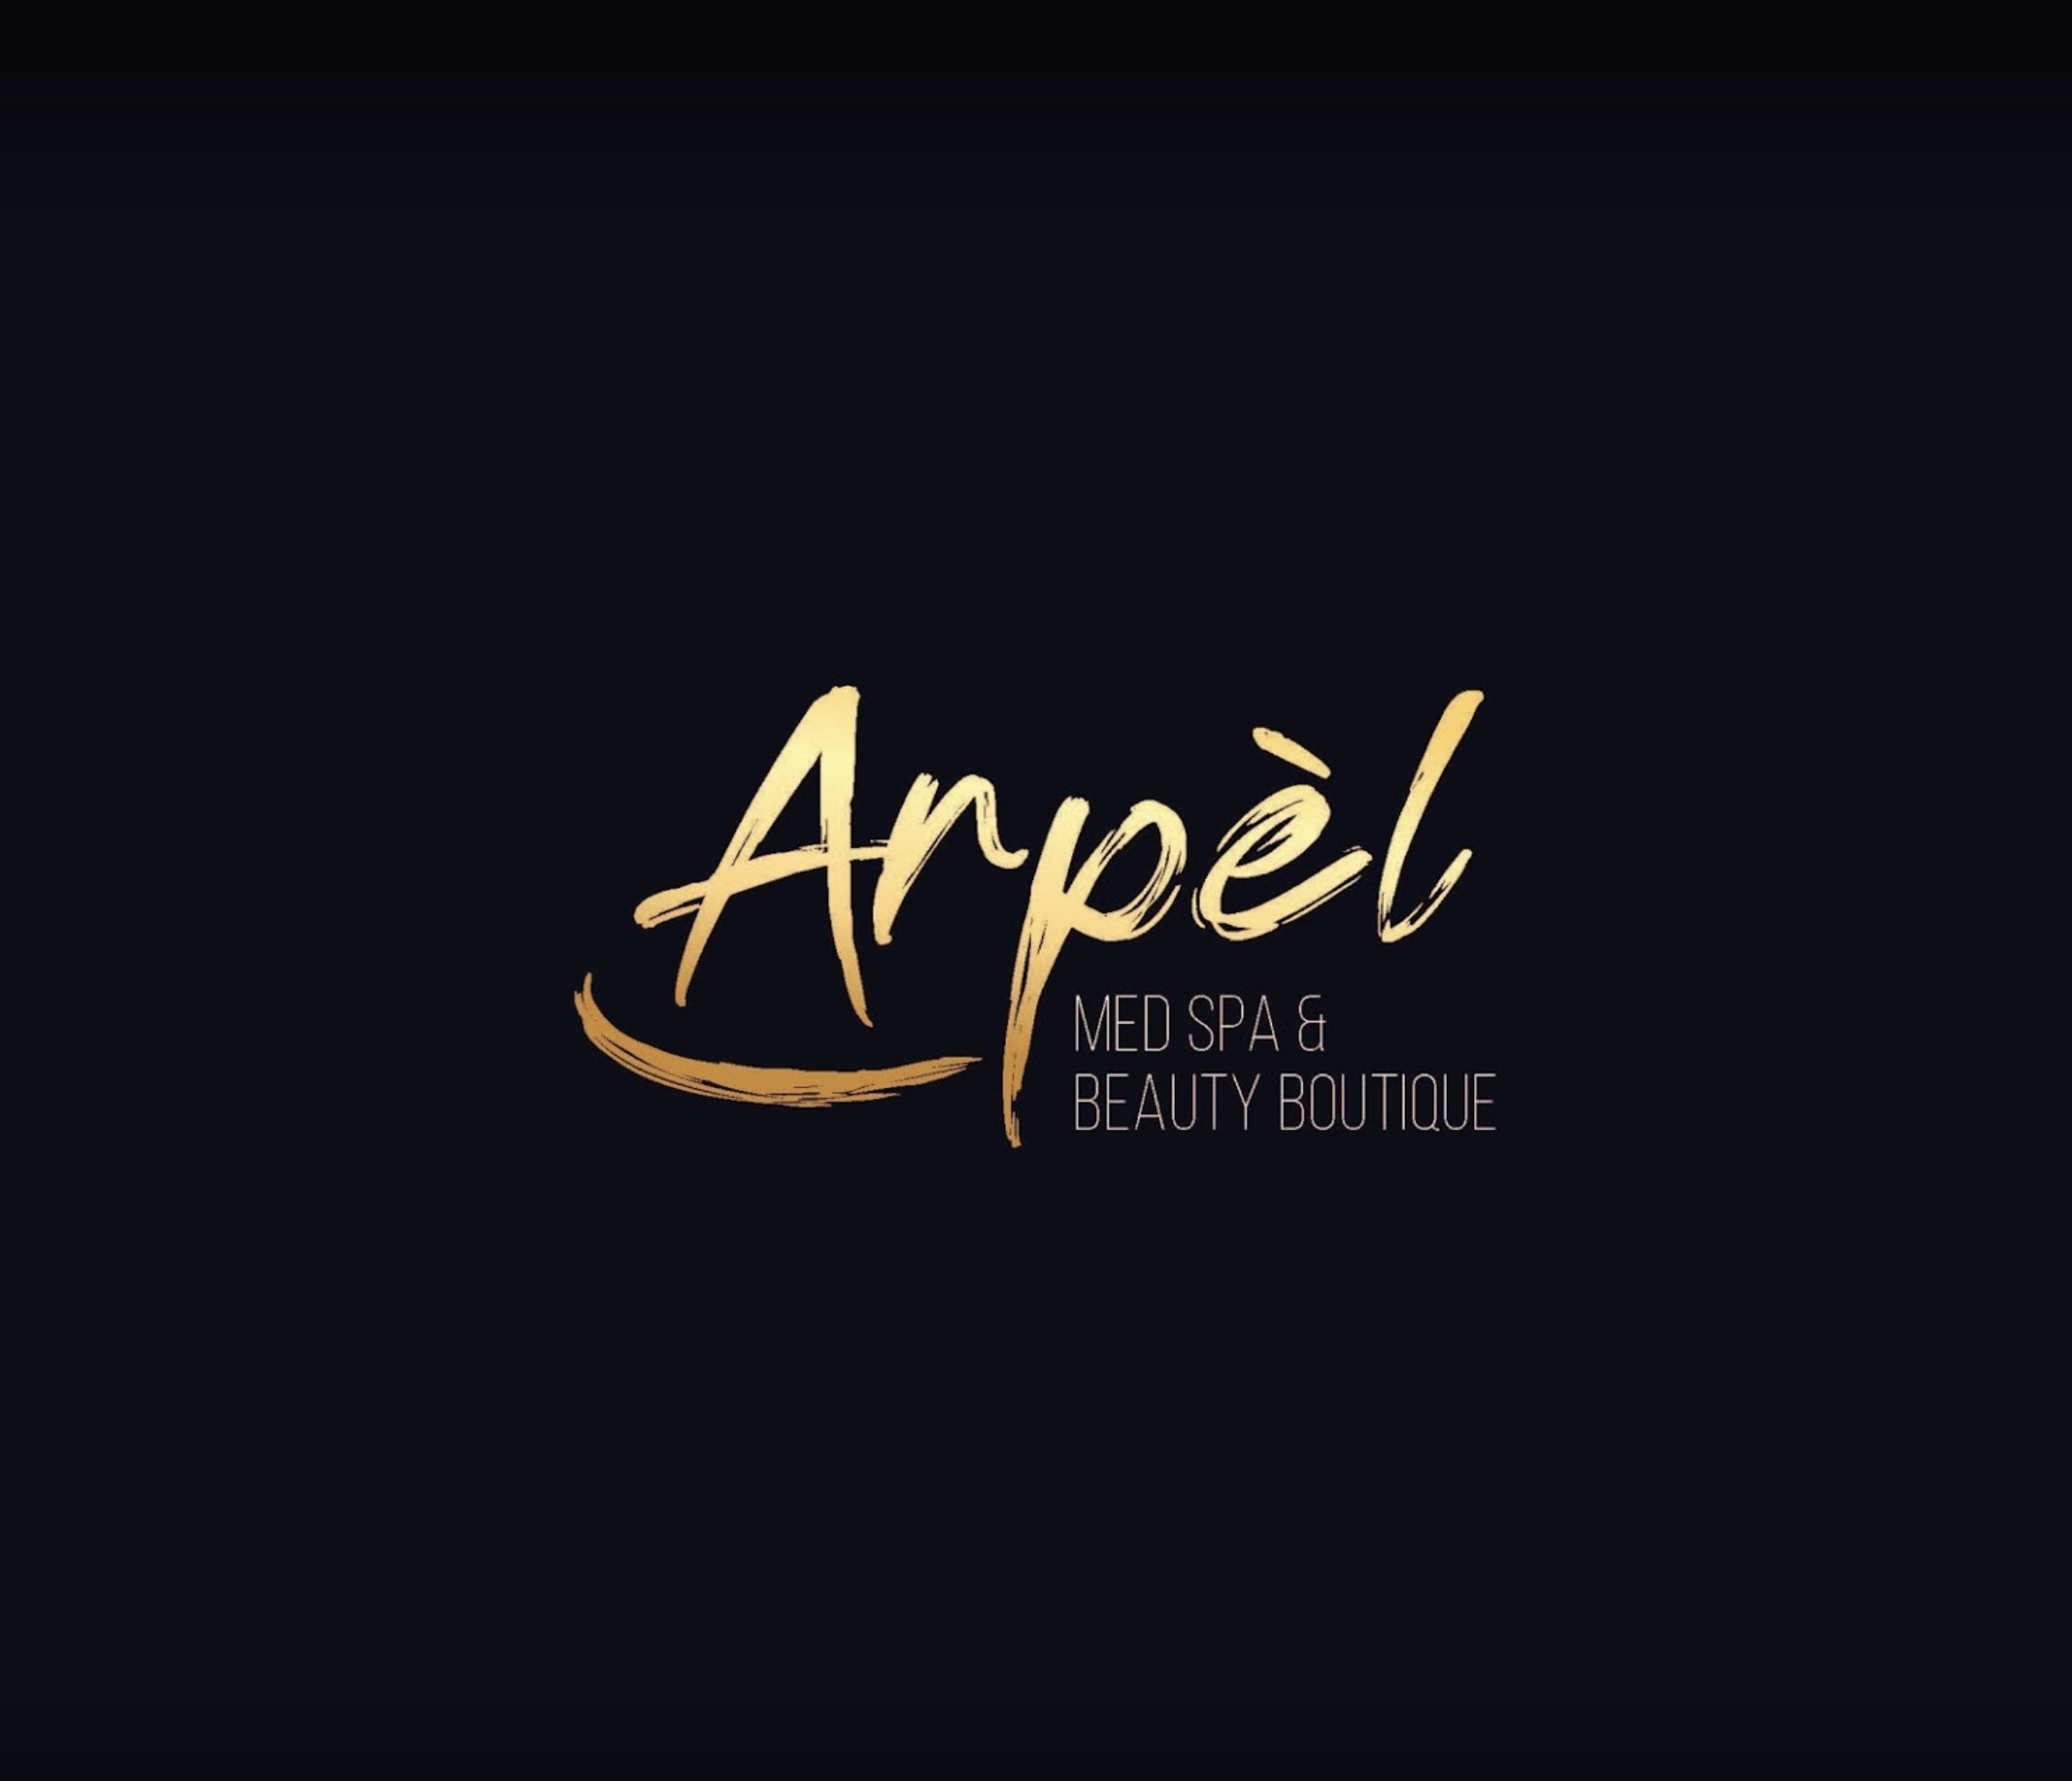 Grand Opening of Arpèl Med Spa - The US Armenians